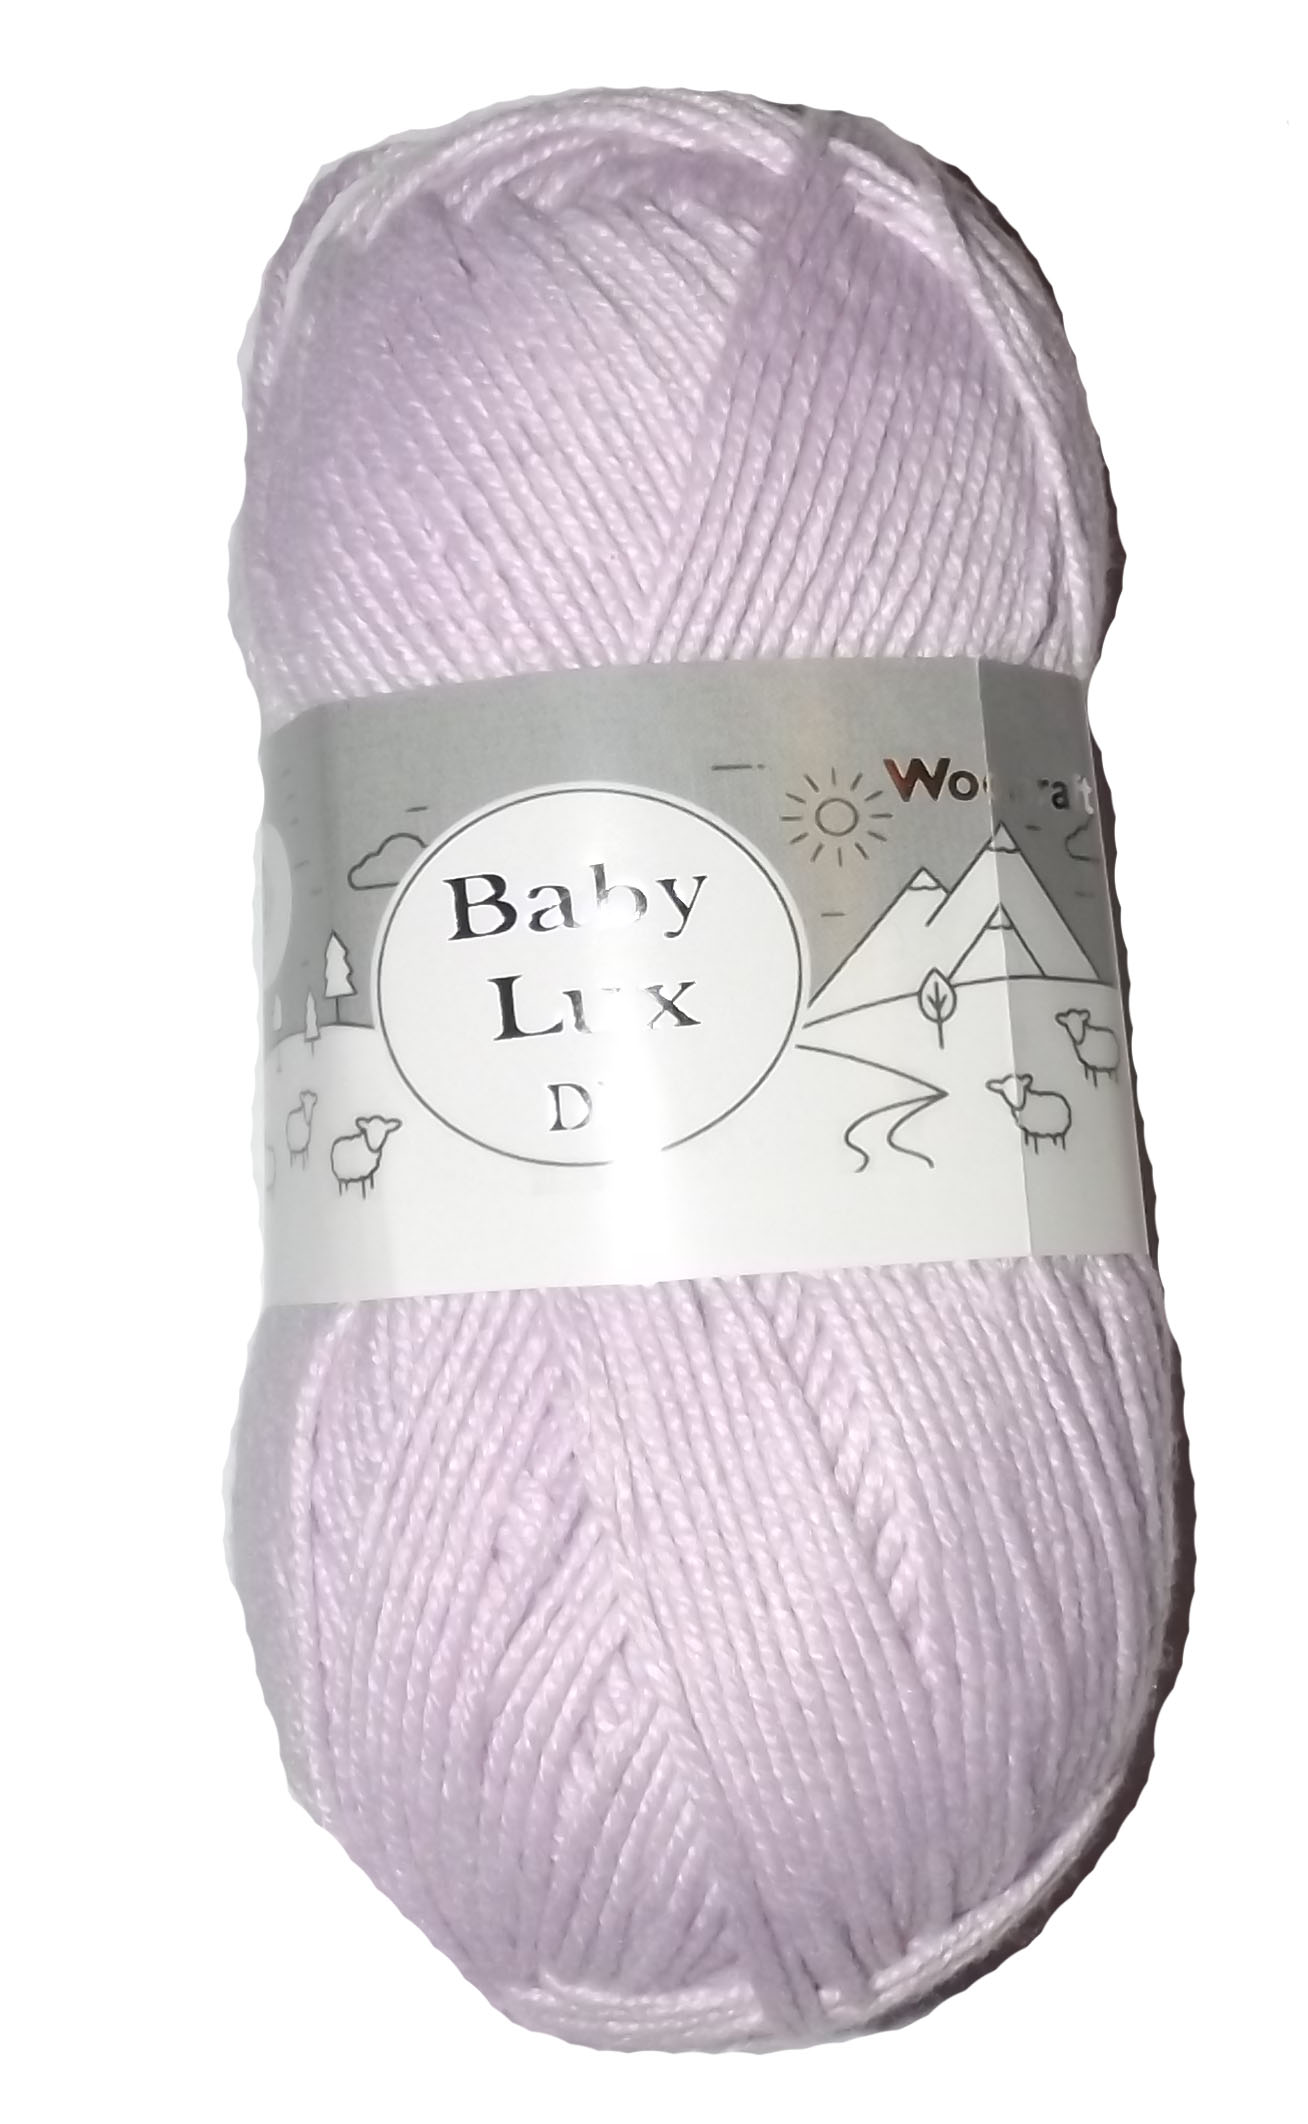 Baby Lux DK 10 x 100g Balls Lilac 70632 - Click Image to Close